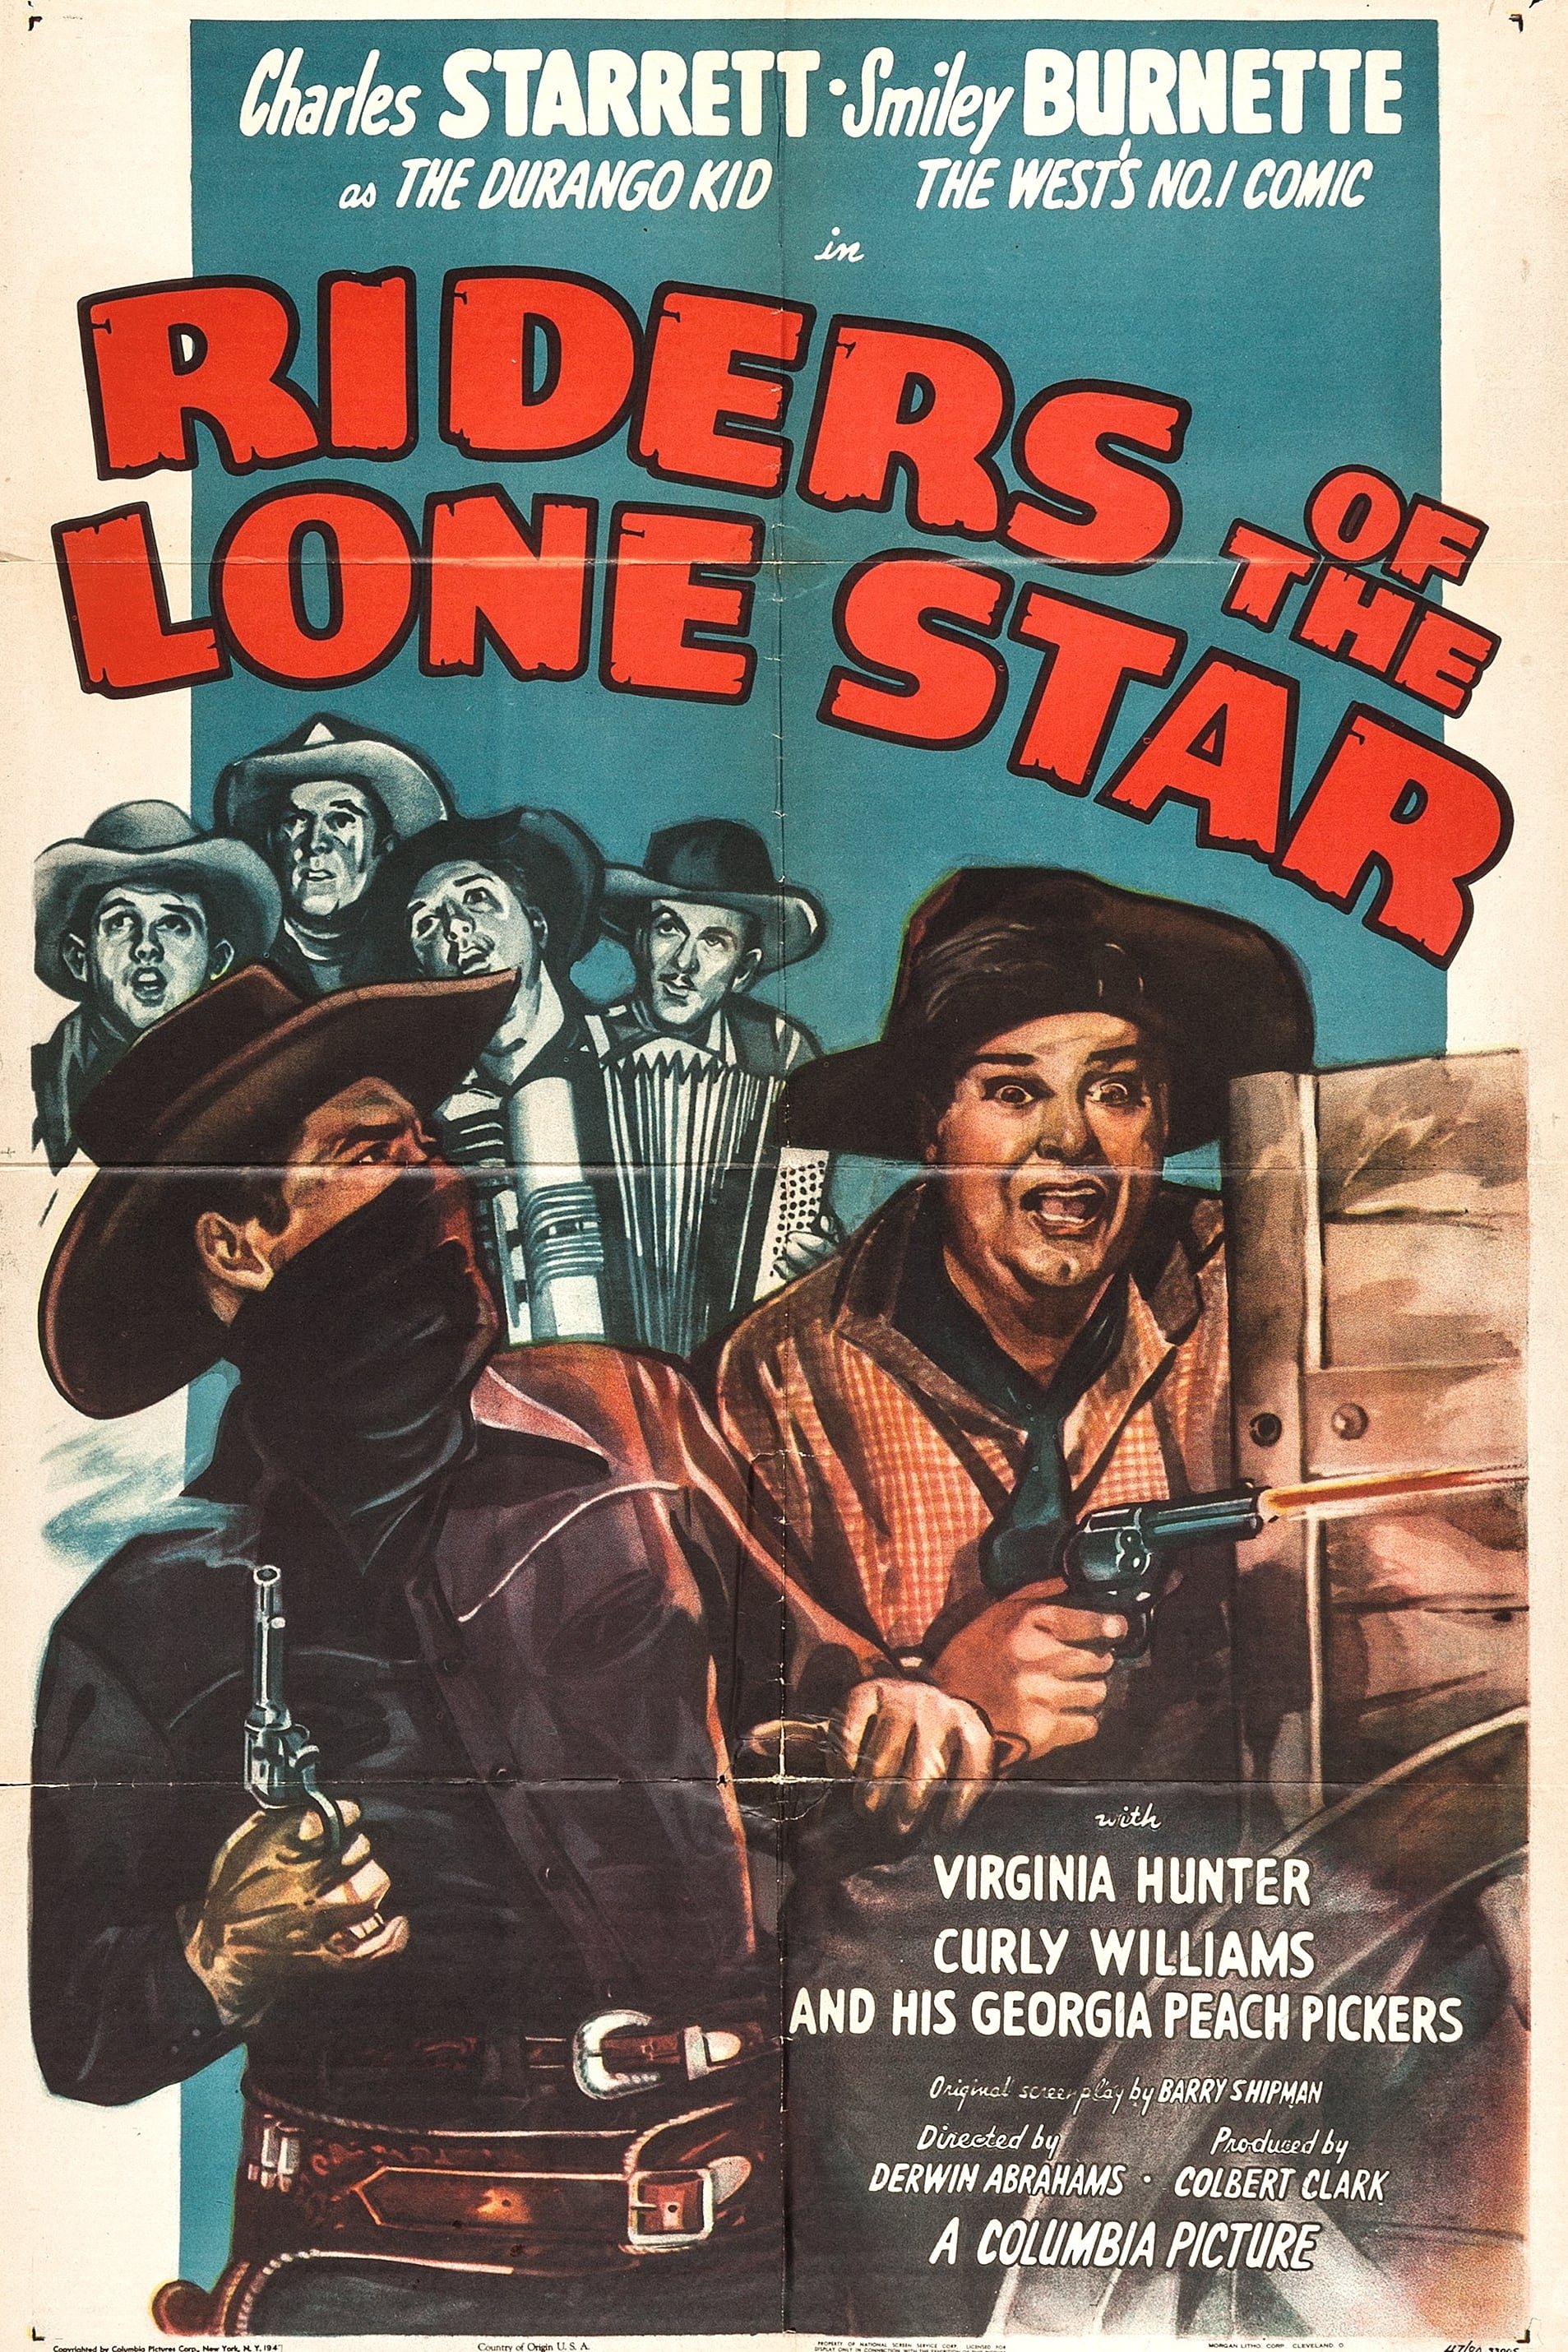 Riders of the Lone Star